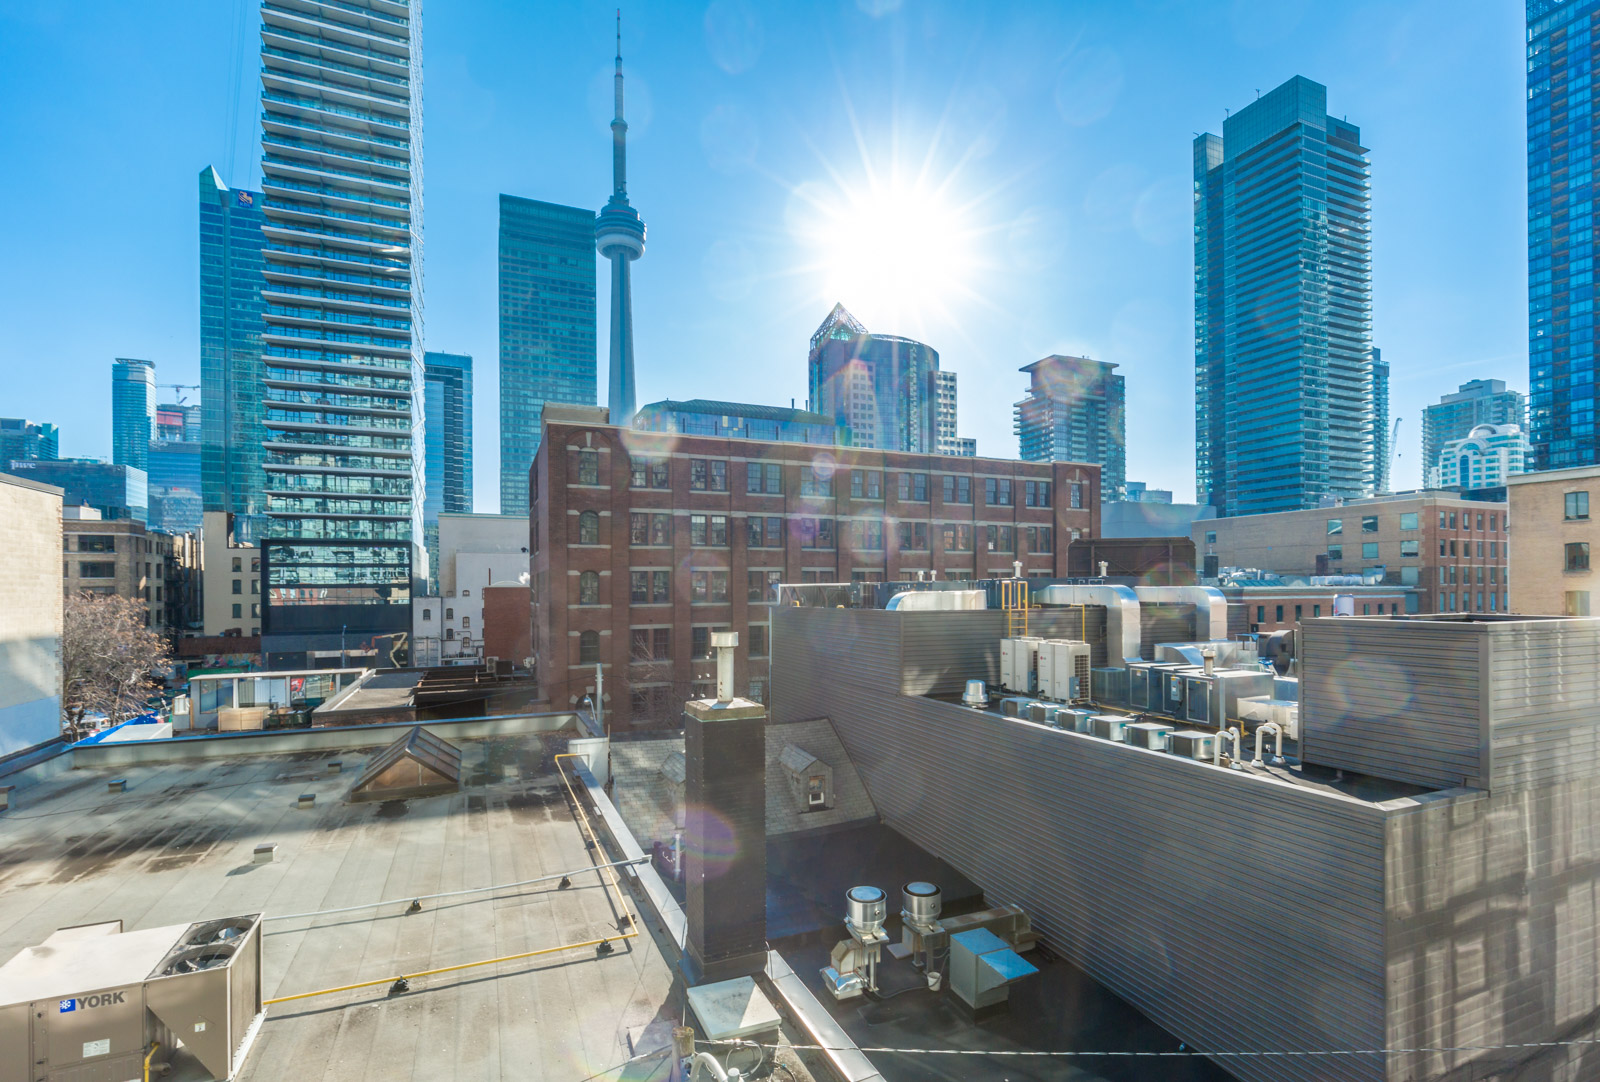 21 Nelson offers unmatched views of downtown Toronto and the CN Tower - Entertainment District - King West